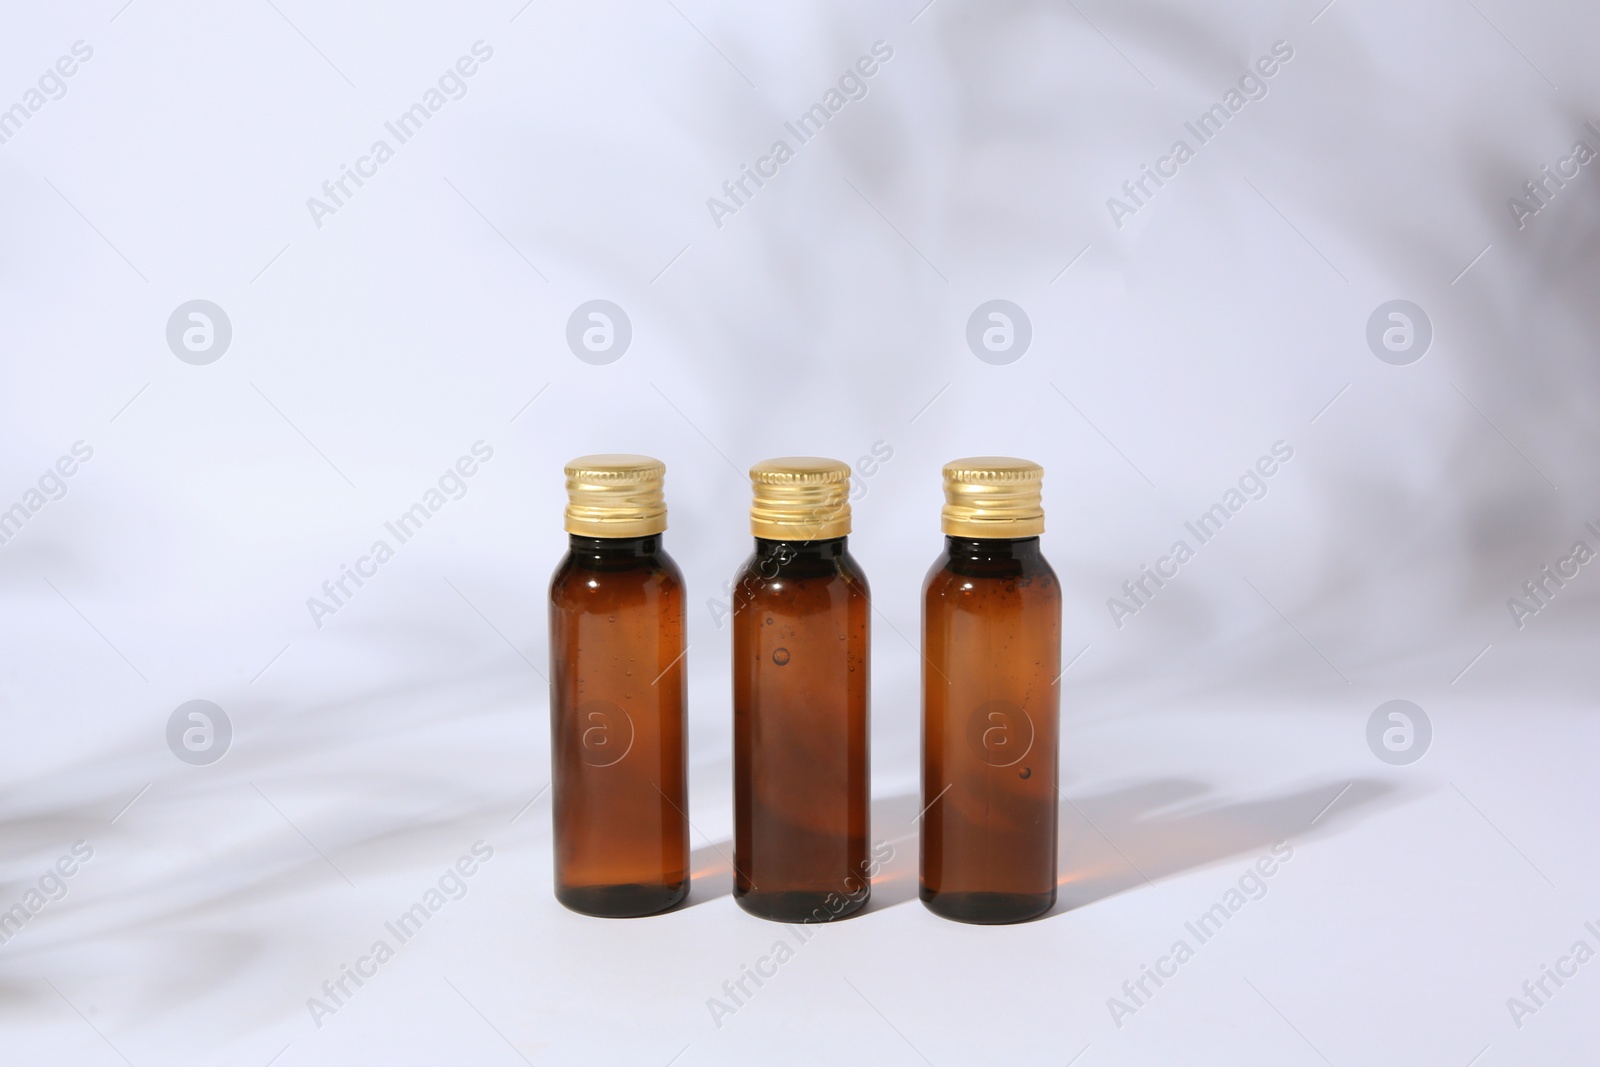 Photo of Bottles of cosmetic products on white background